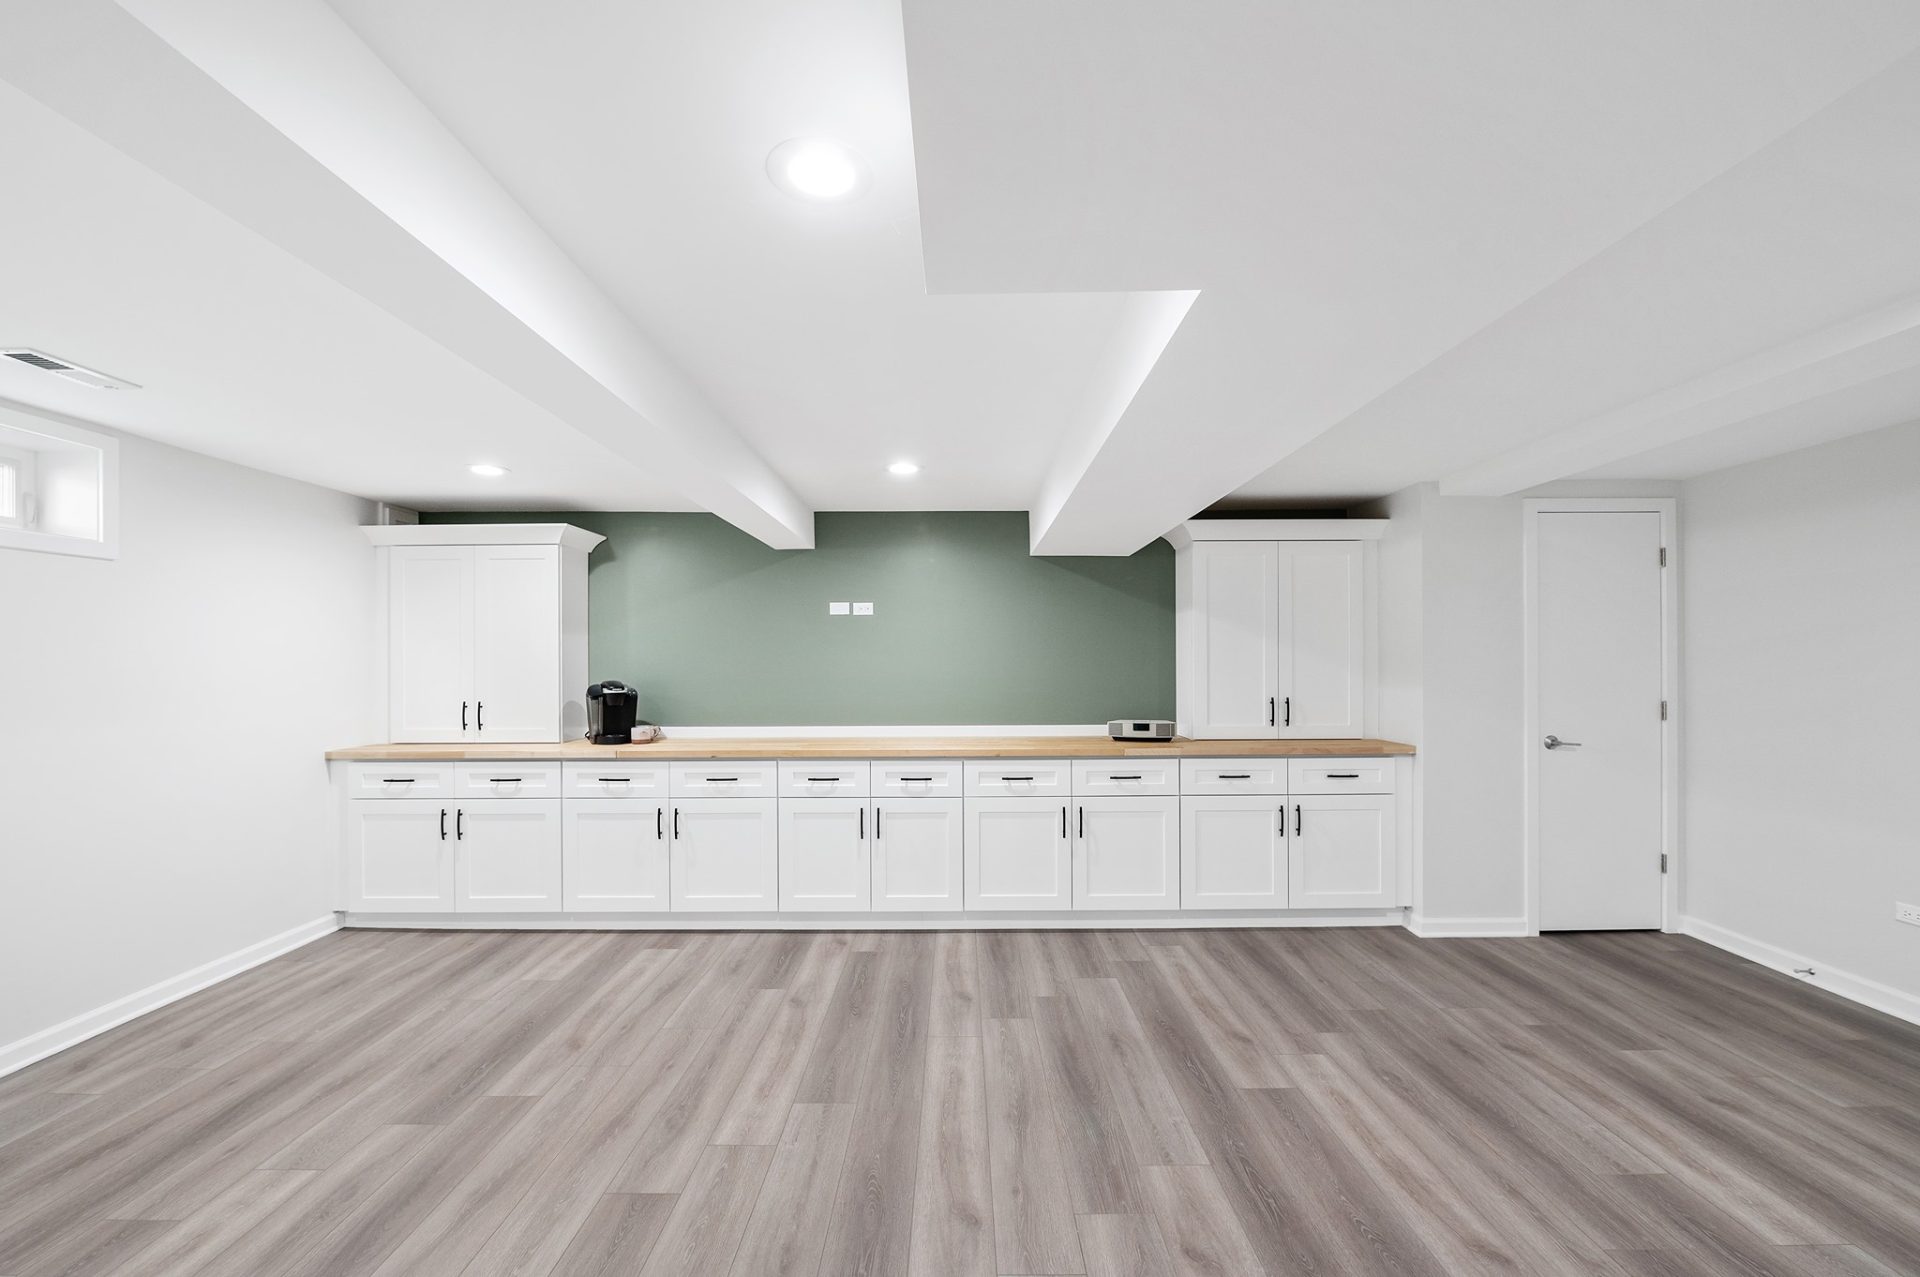 Full basement remodel with LVT flooring, white cabinets with black hardware and butcher block countertop